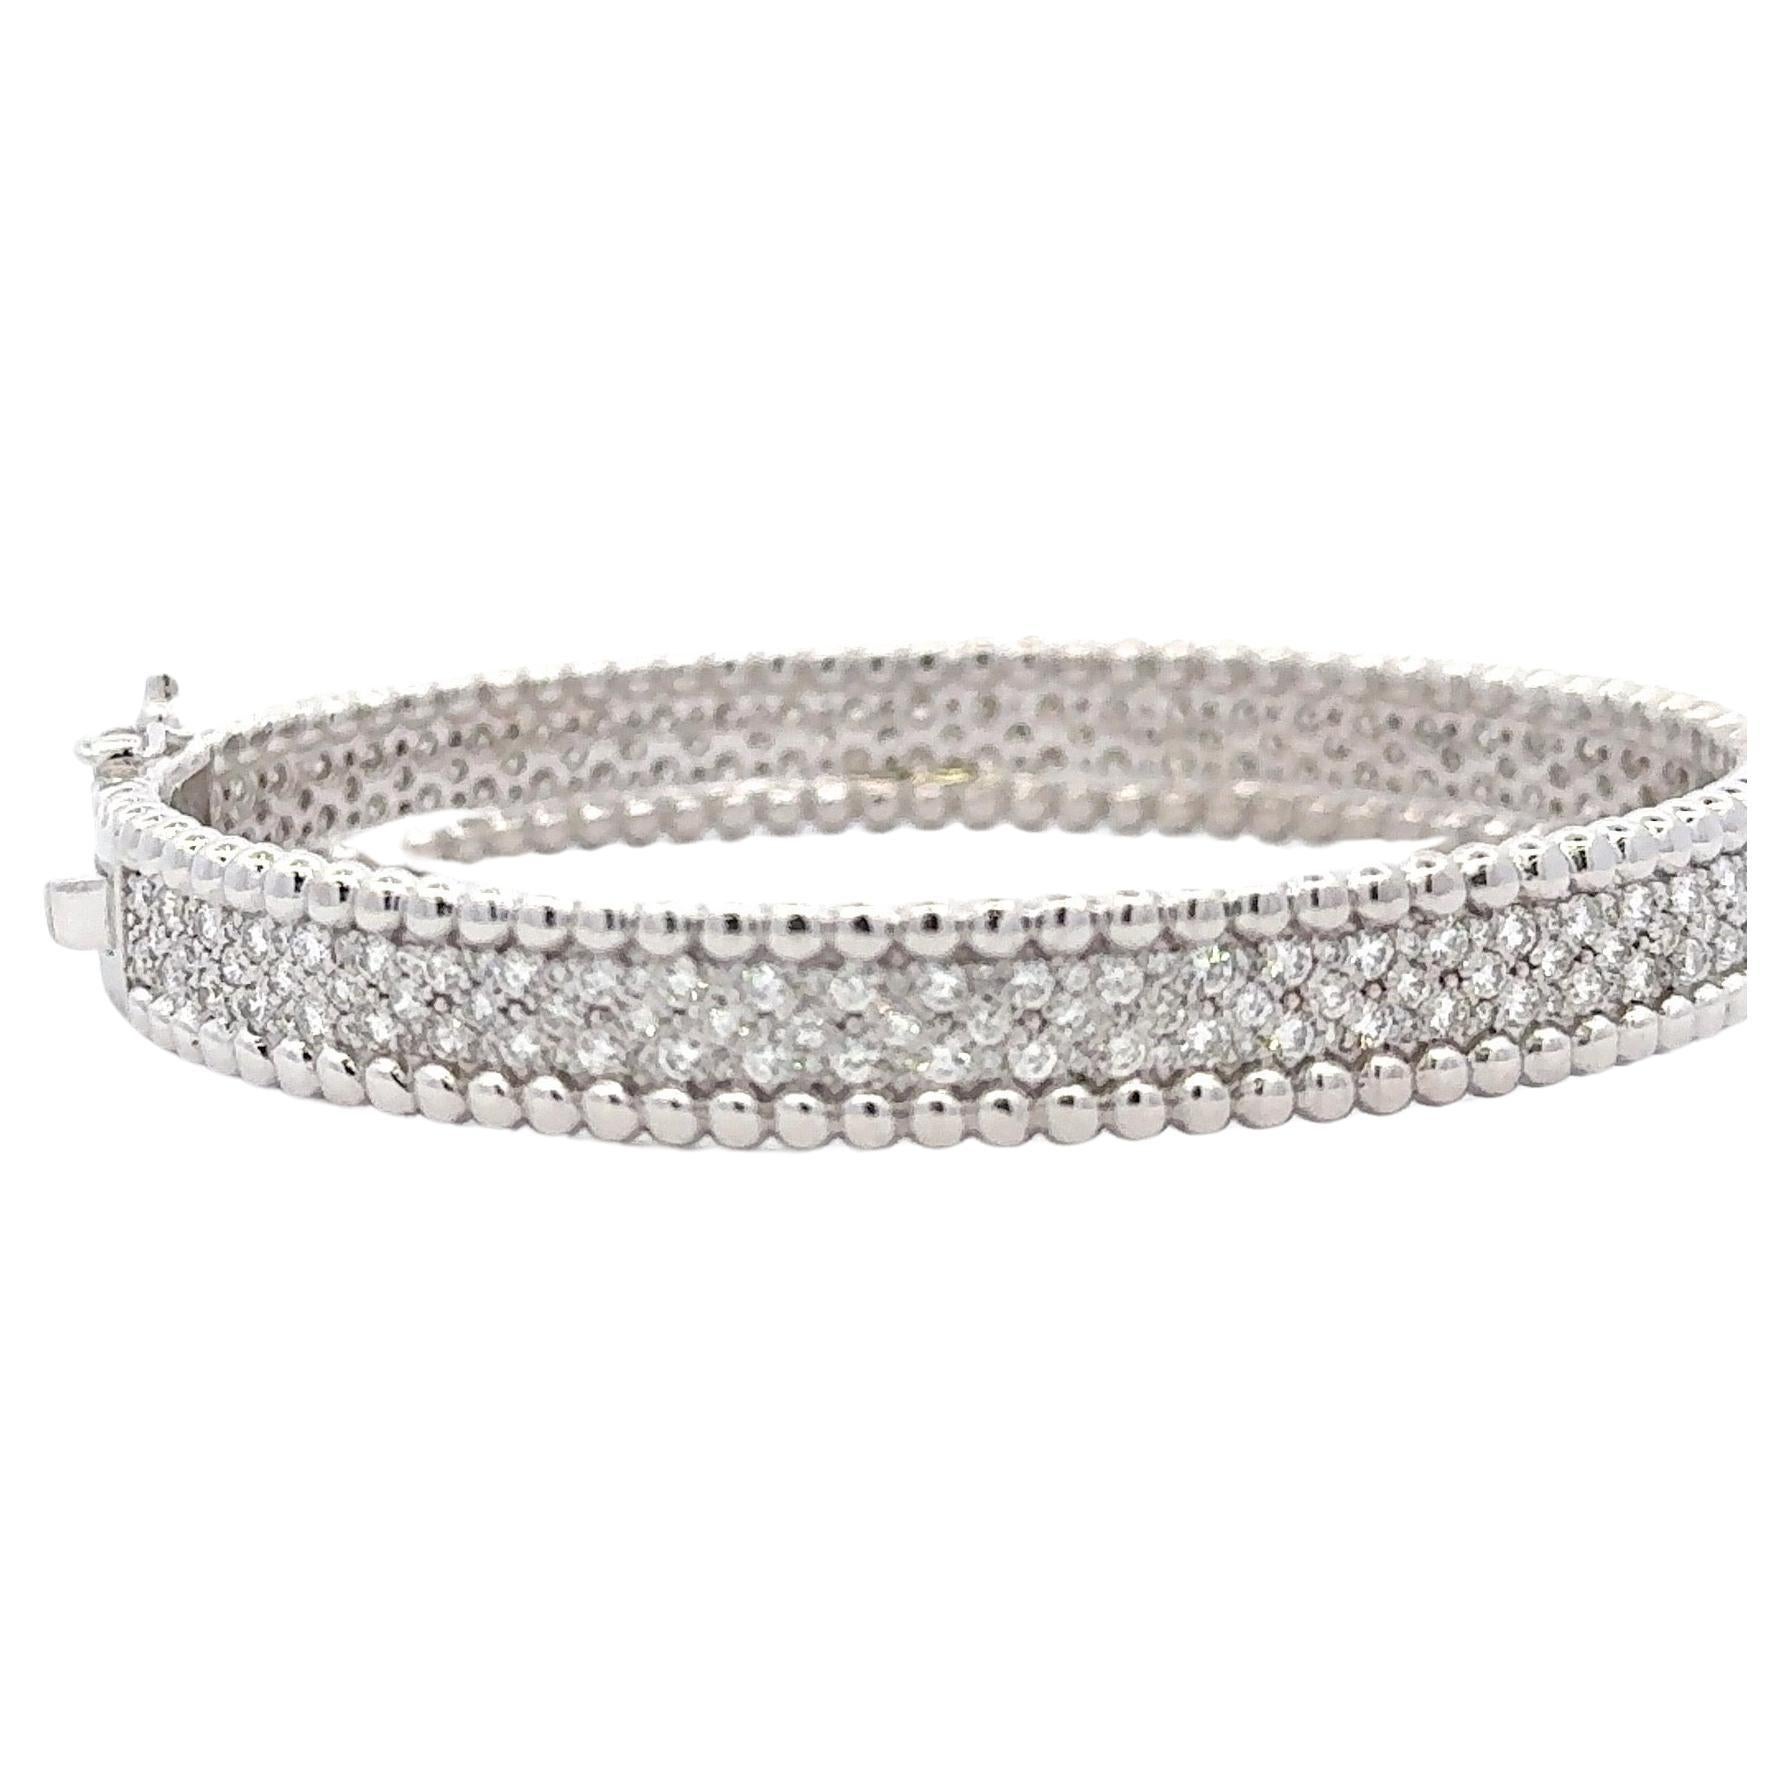 14 Karat white gold bangle bracelet featuring three rows of 286 round brilliants weighing 3.88 carats.
Sparkles & full of life.
Can be made in yellow or rose gold.

Color F-G
Clarity VS1-VS2